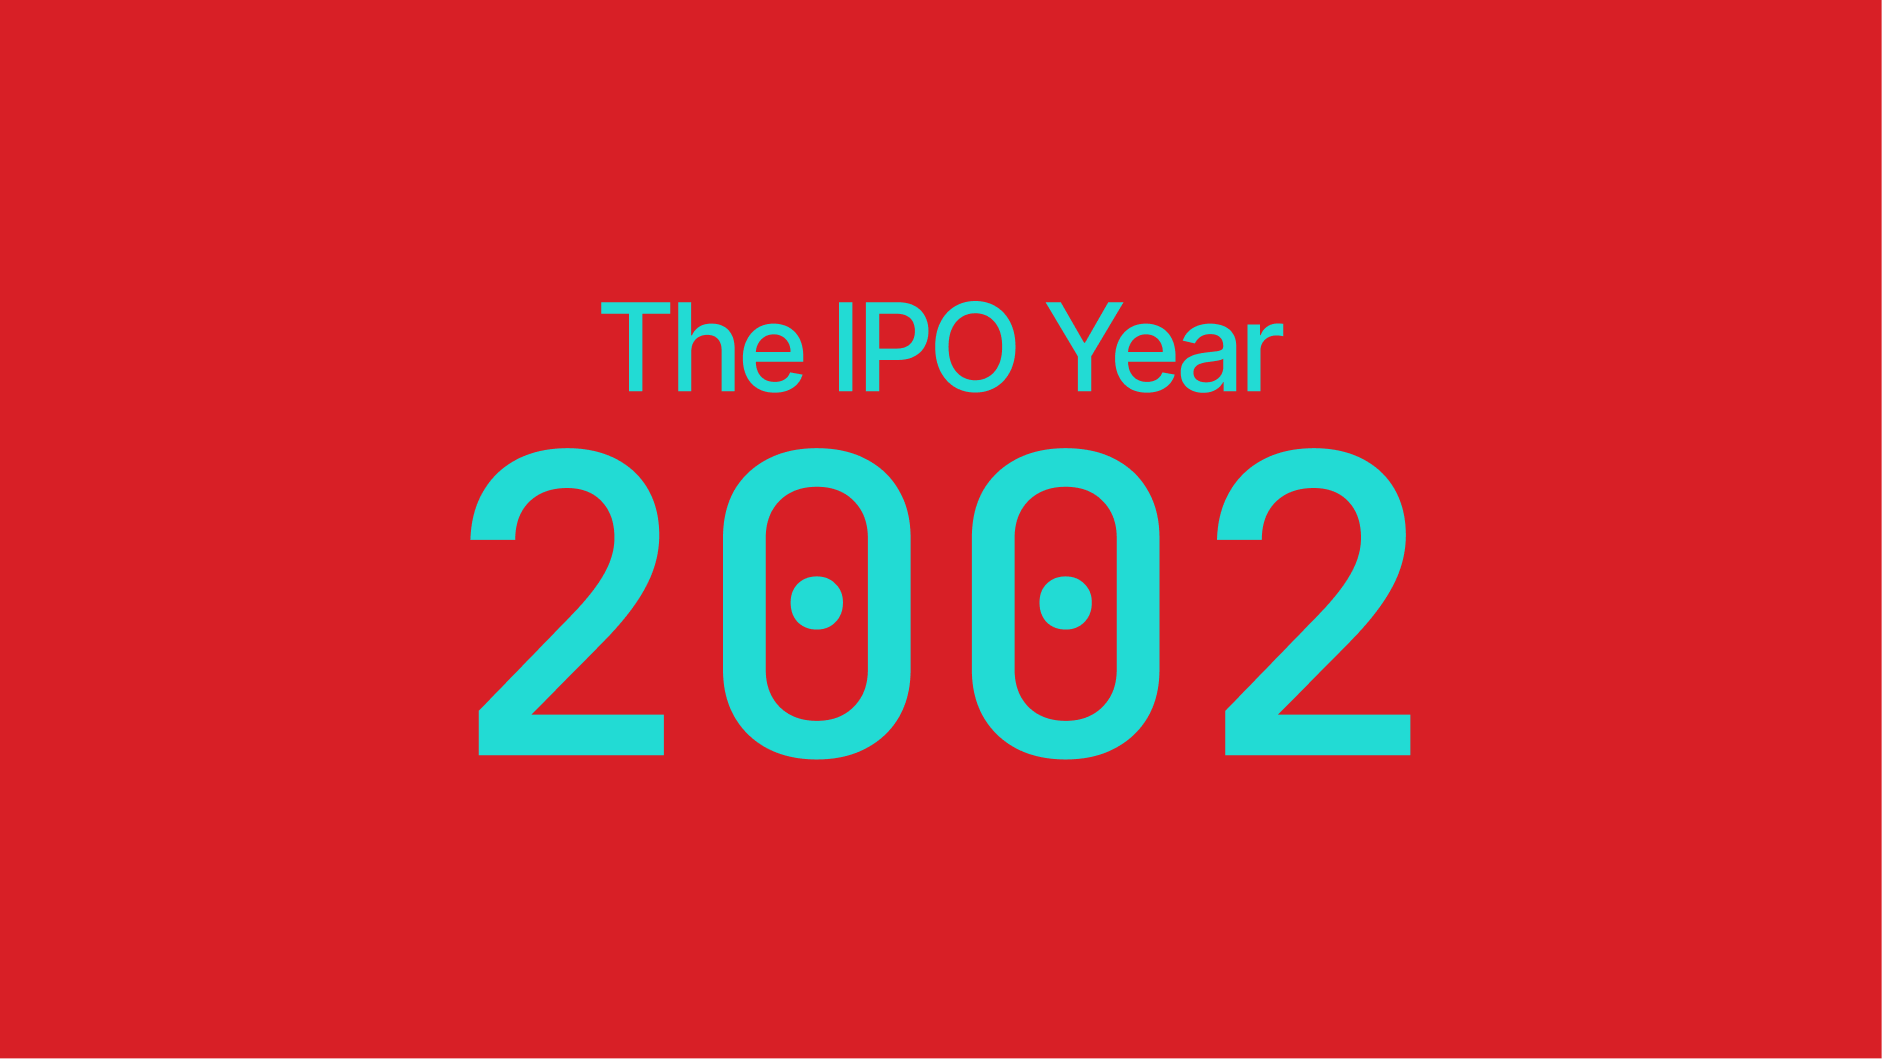 Initial Public Offerings - IPOs in 2002